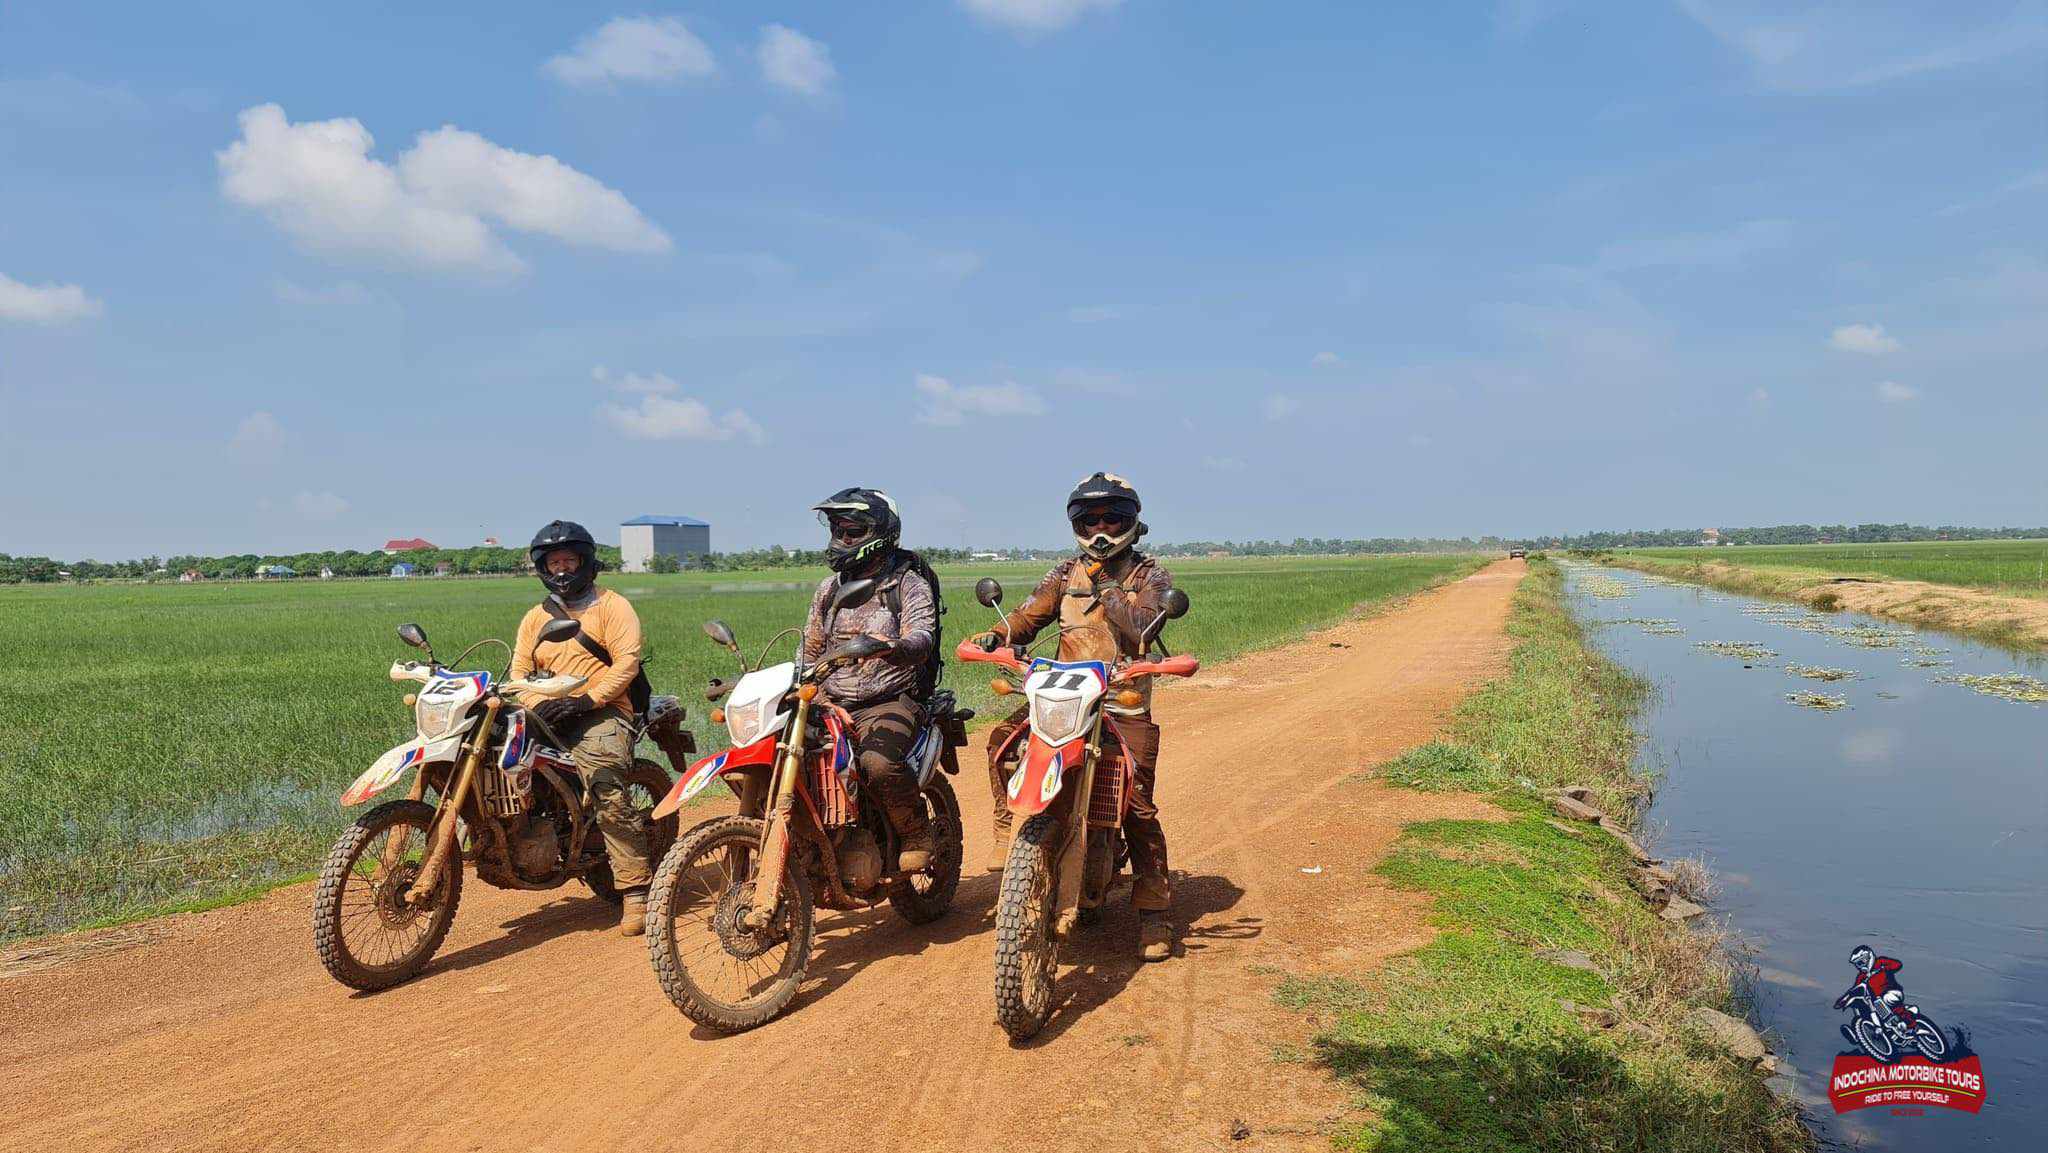 Cambodia off road motorbike tour from phnom penh to siem reap 23 - Adventurous Northern Cambodia Off-road Motorbike Tour